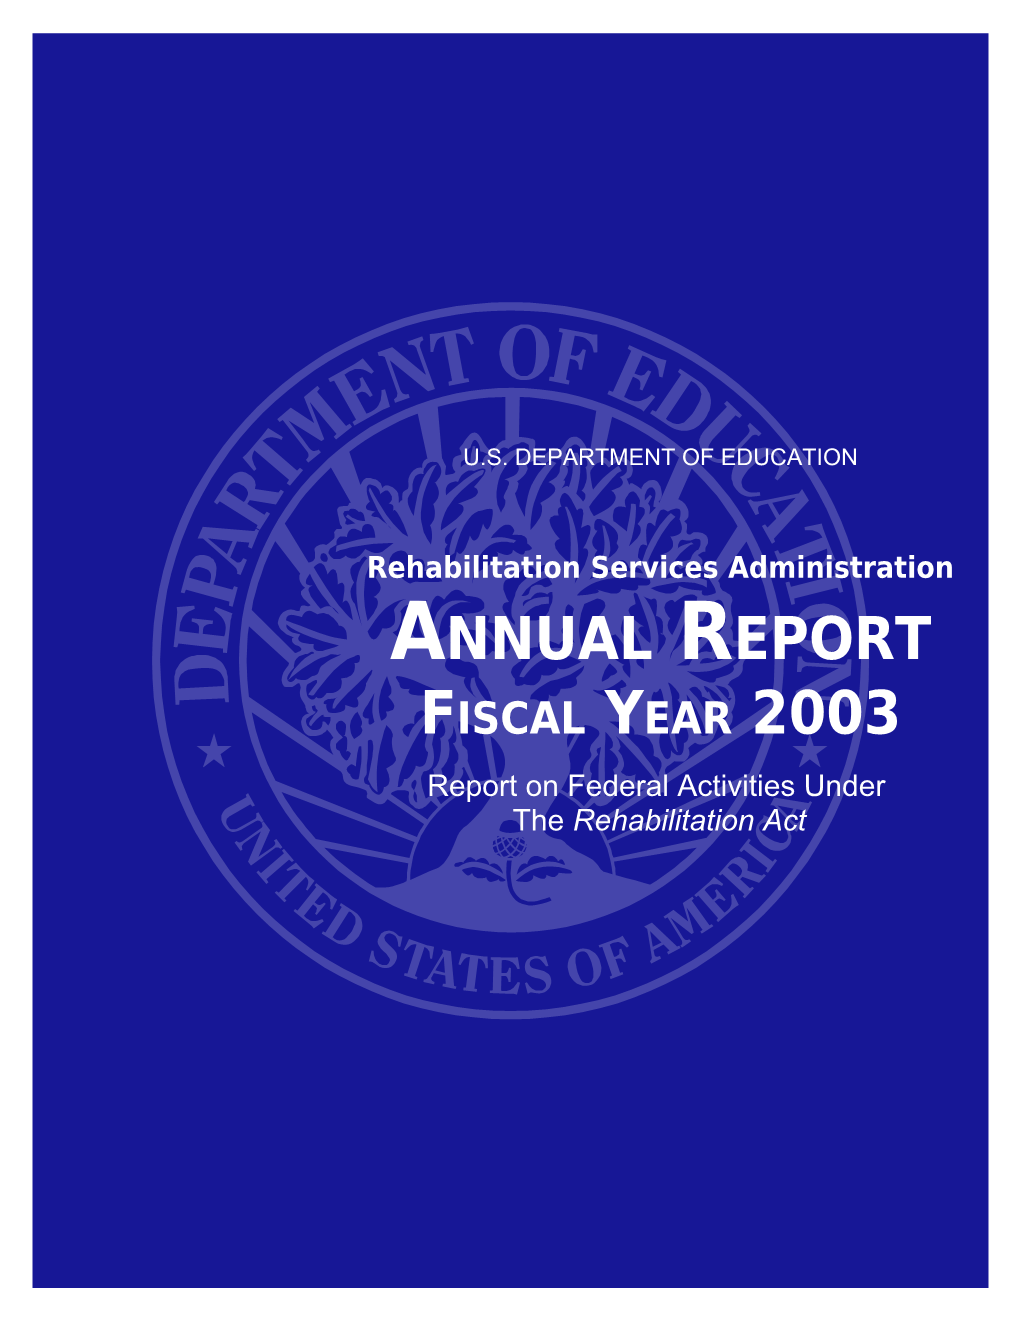 Rehabiliation Services Administration, Annual Report to Congress, 2004 (MS Word)